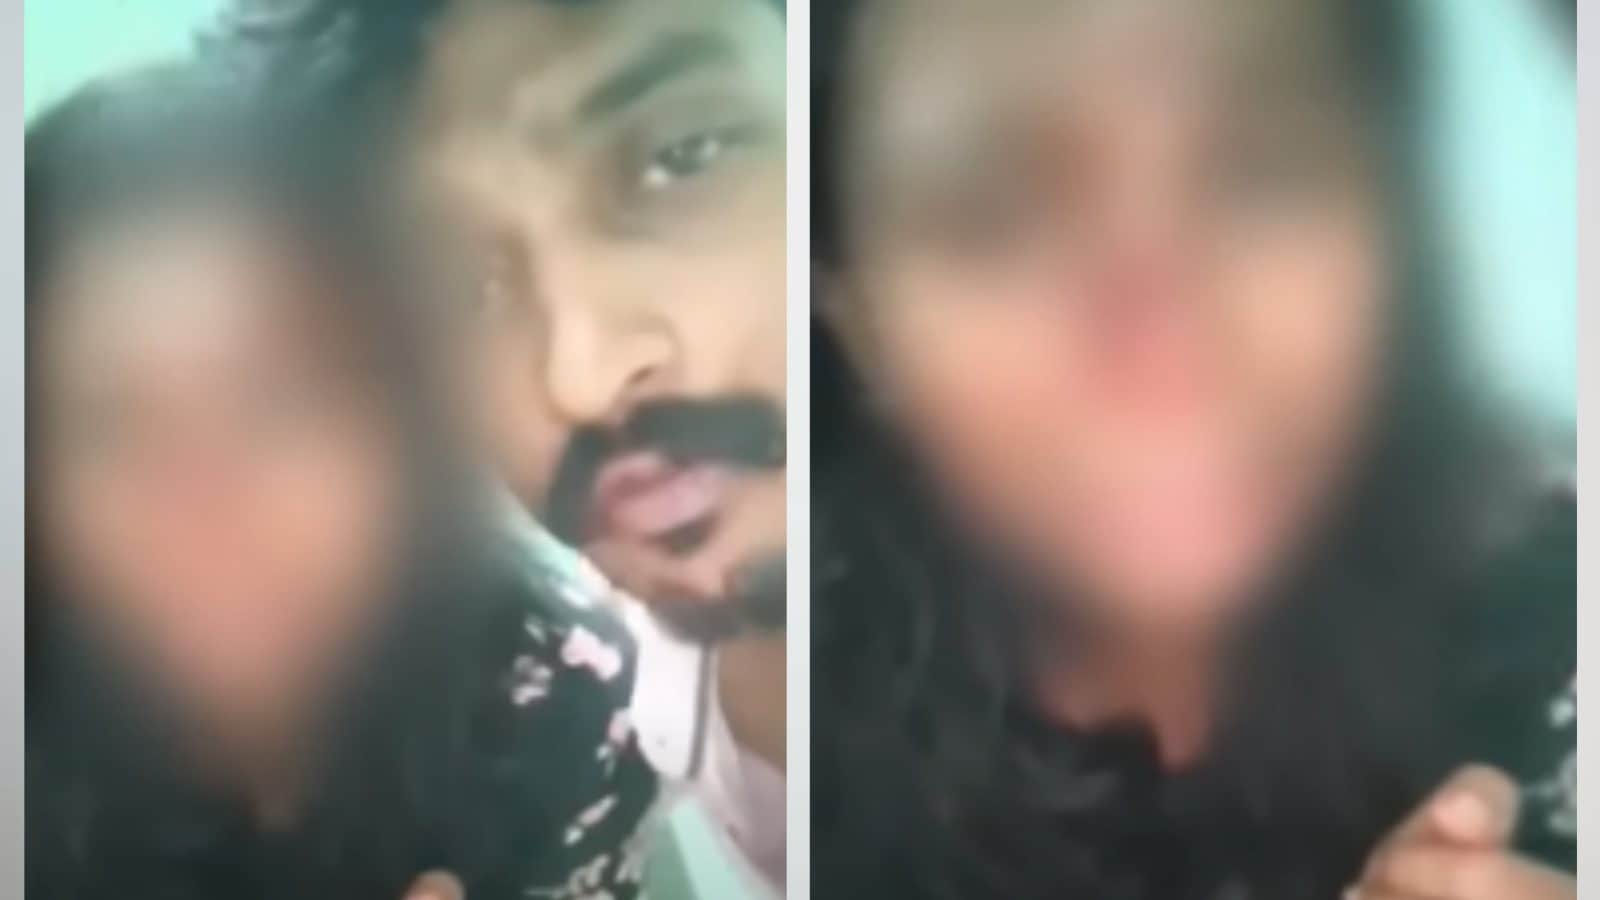 Kerala Man Thrashes Wife, Films Assault, Shares Video With Friends